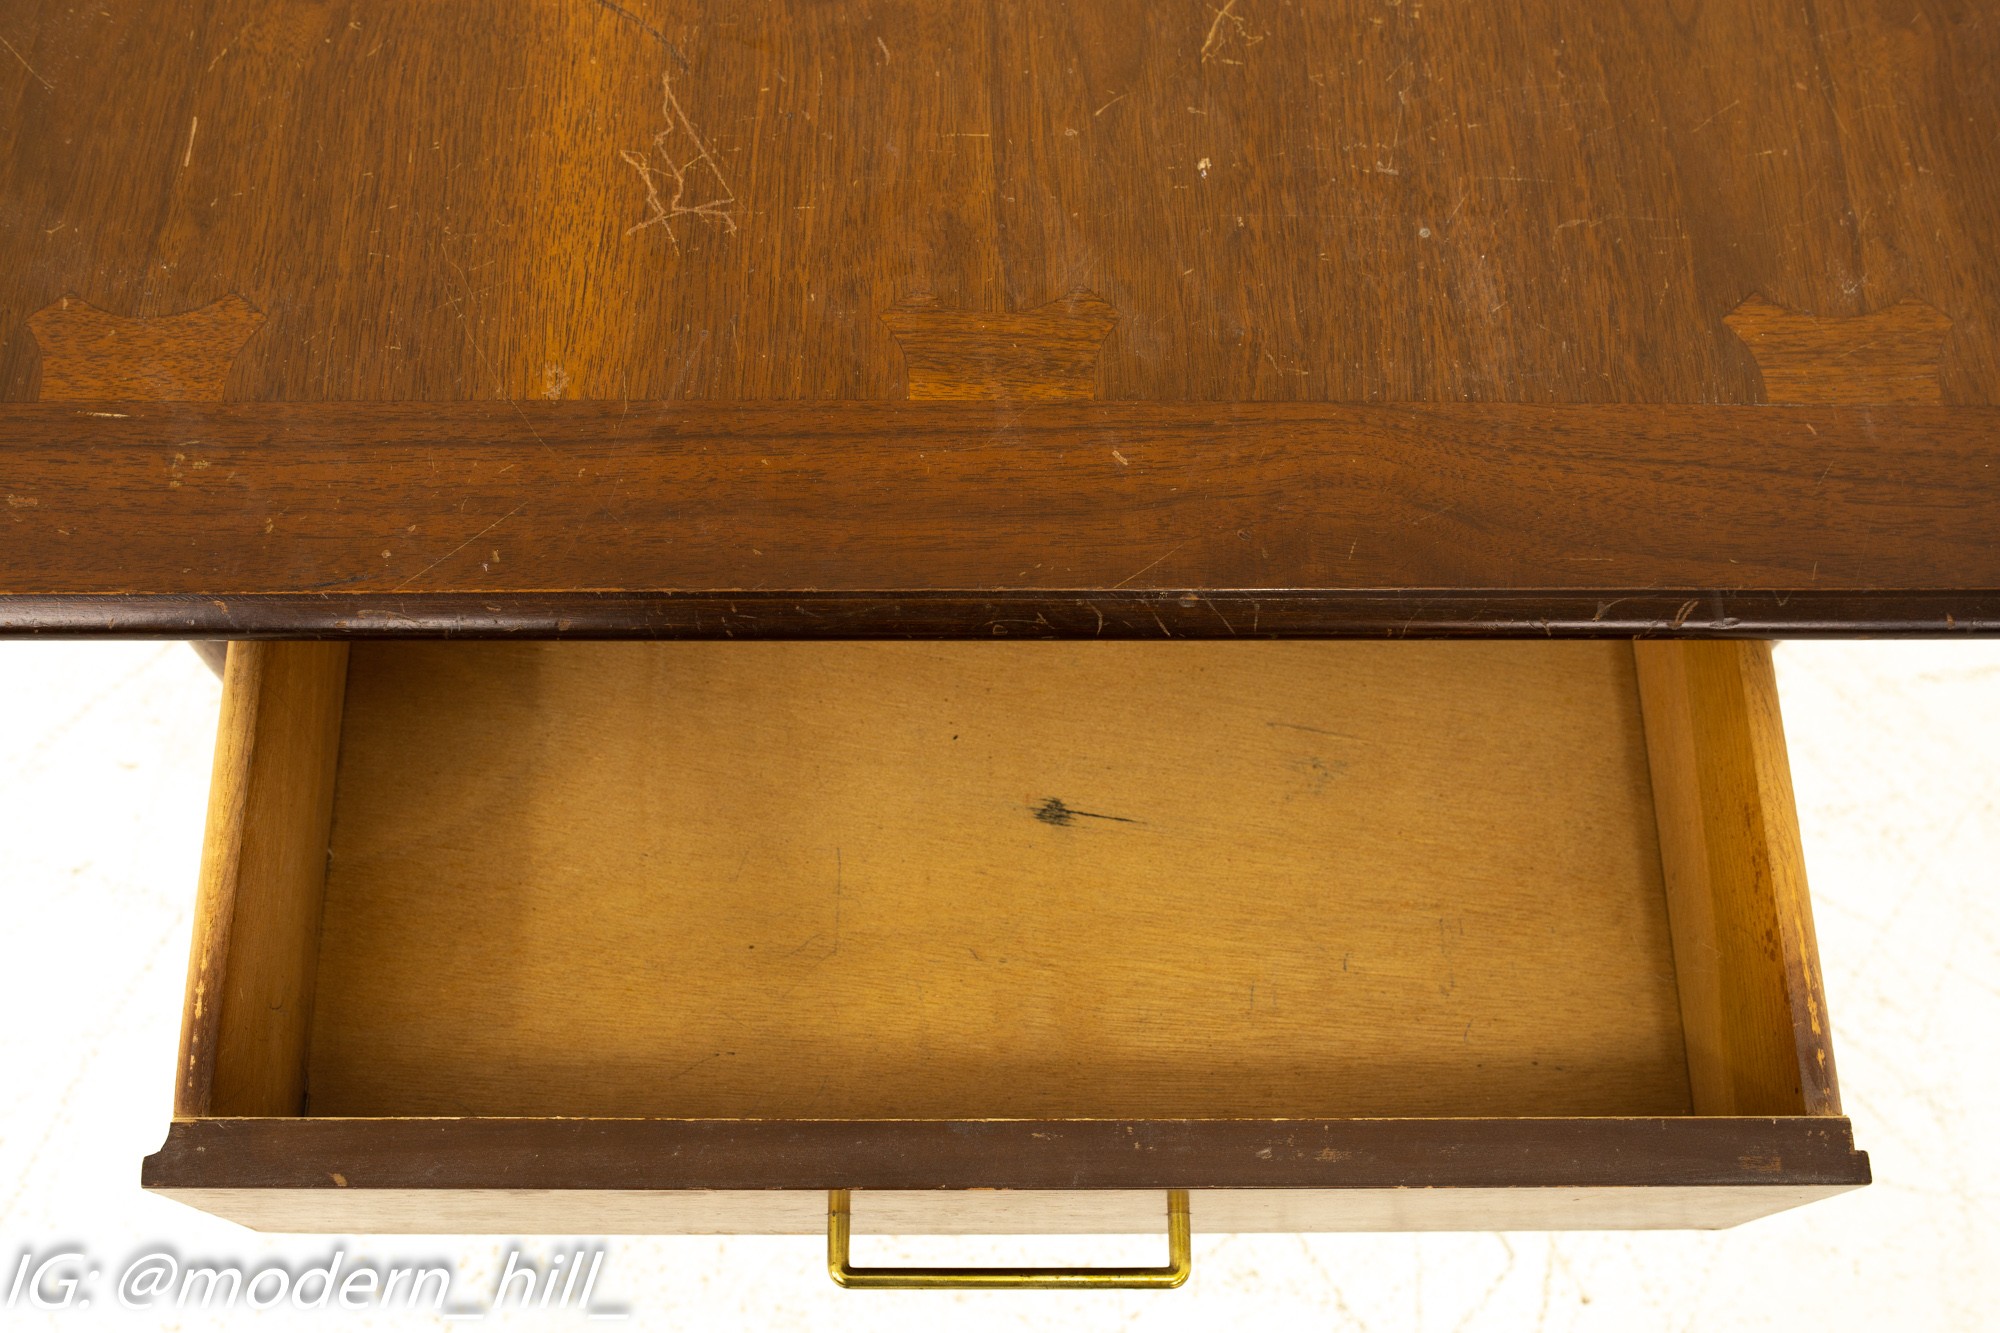 Lane Mid Century Square Walnut Side End Table